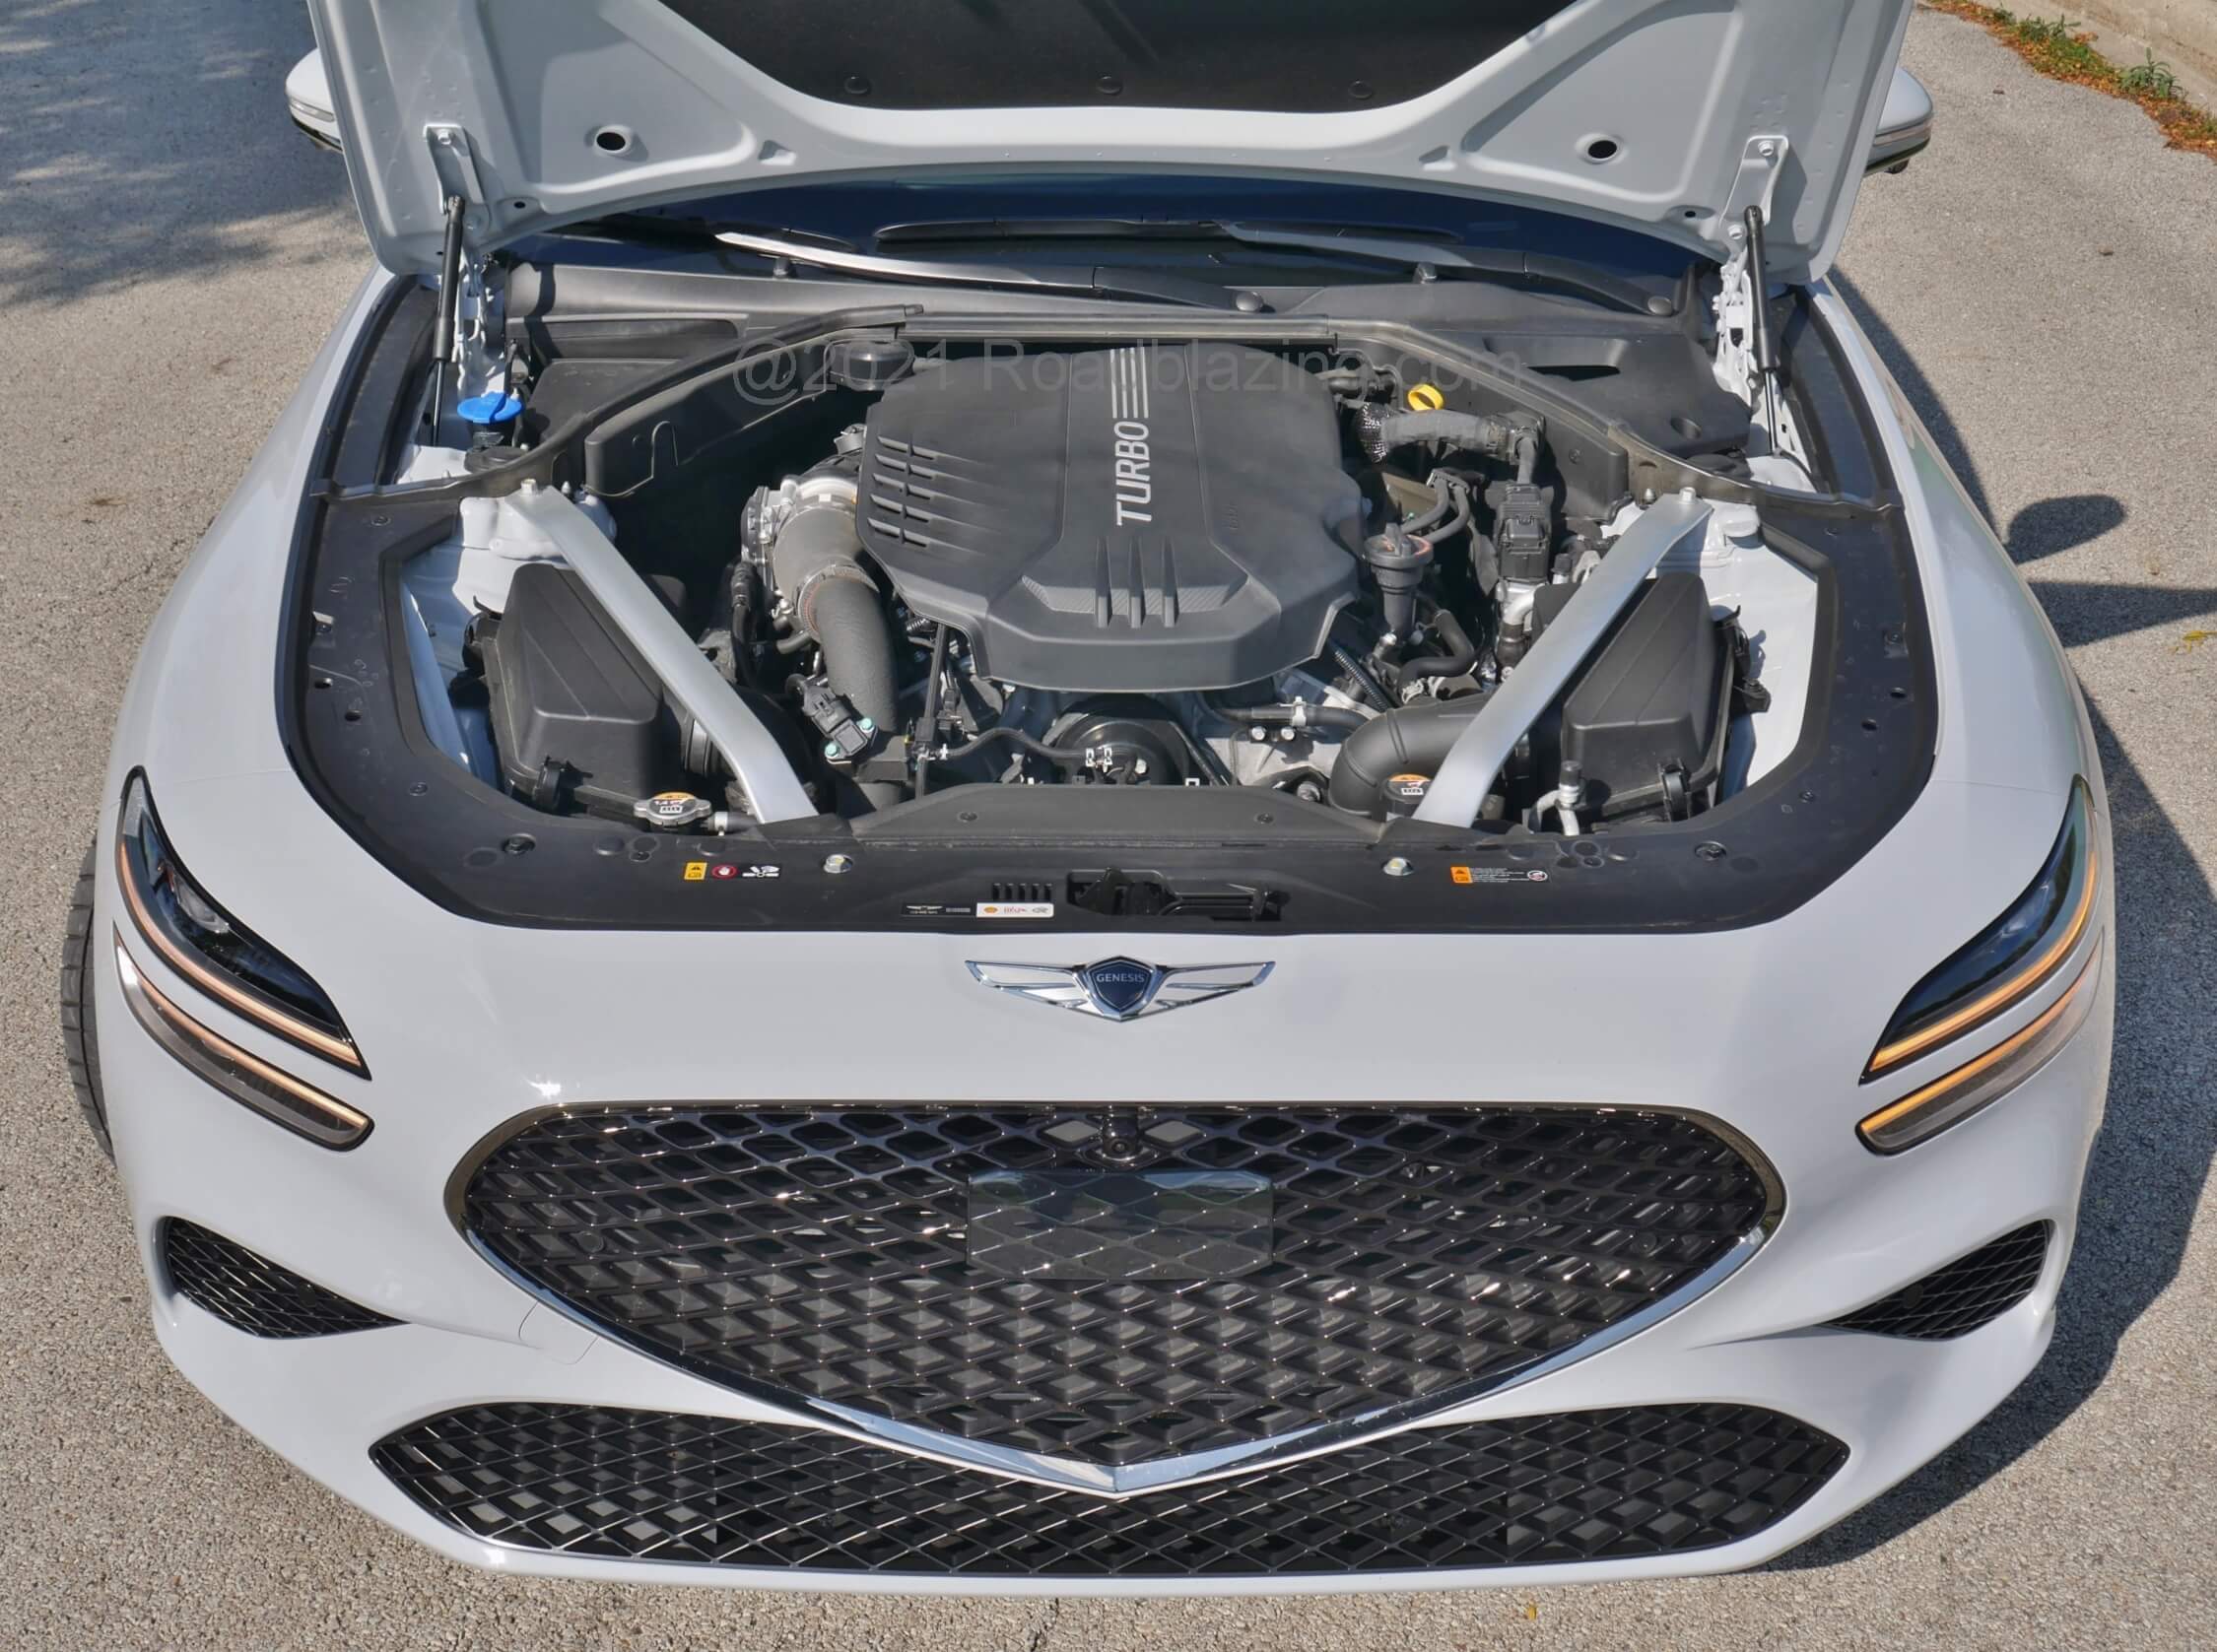 2022 Genesis G70 3.3T Sport: 365 hp + 376 lb-ft performance car muscle with a bark + authoritative 8-speed slushbox gains new Sport Plus launch control drive mode